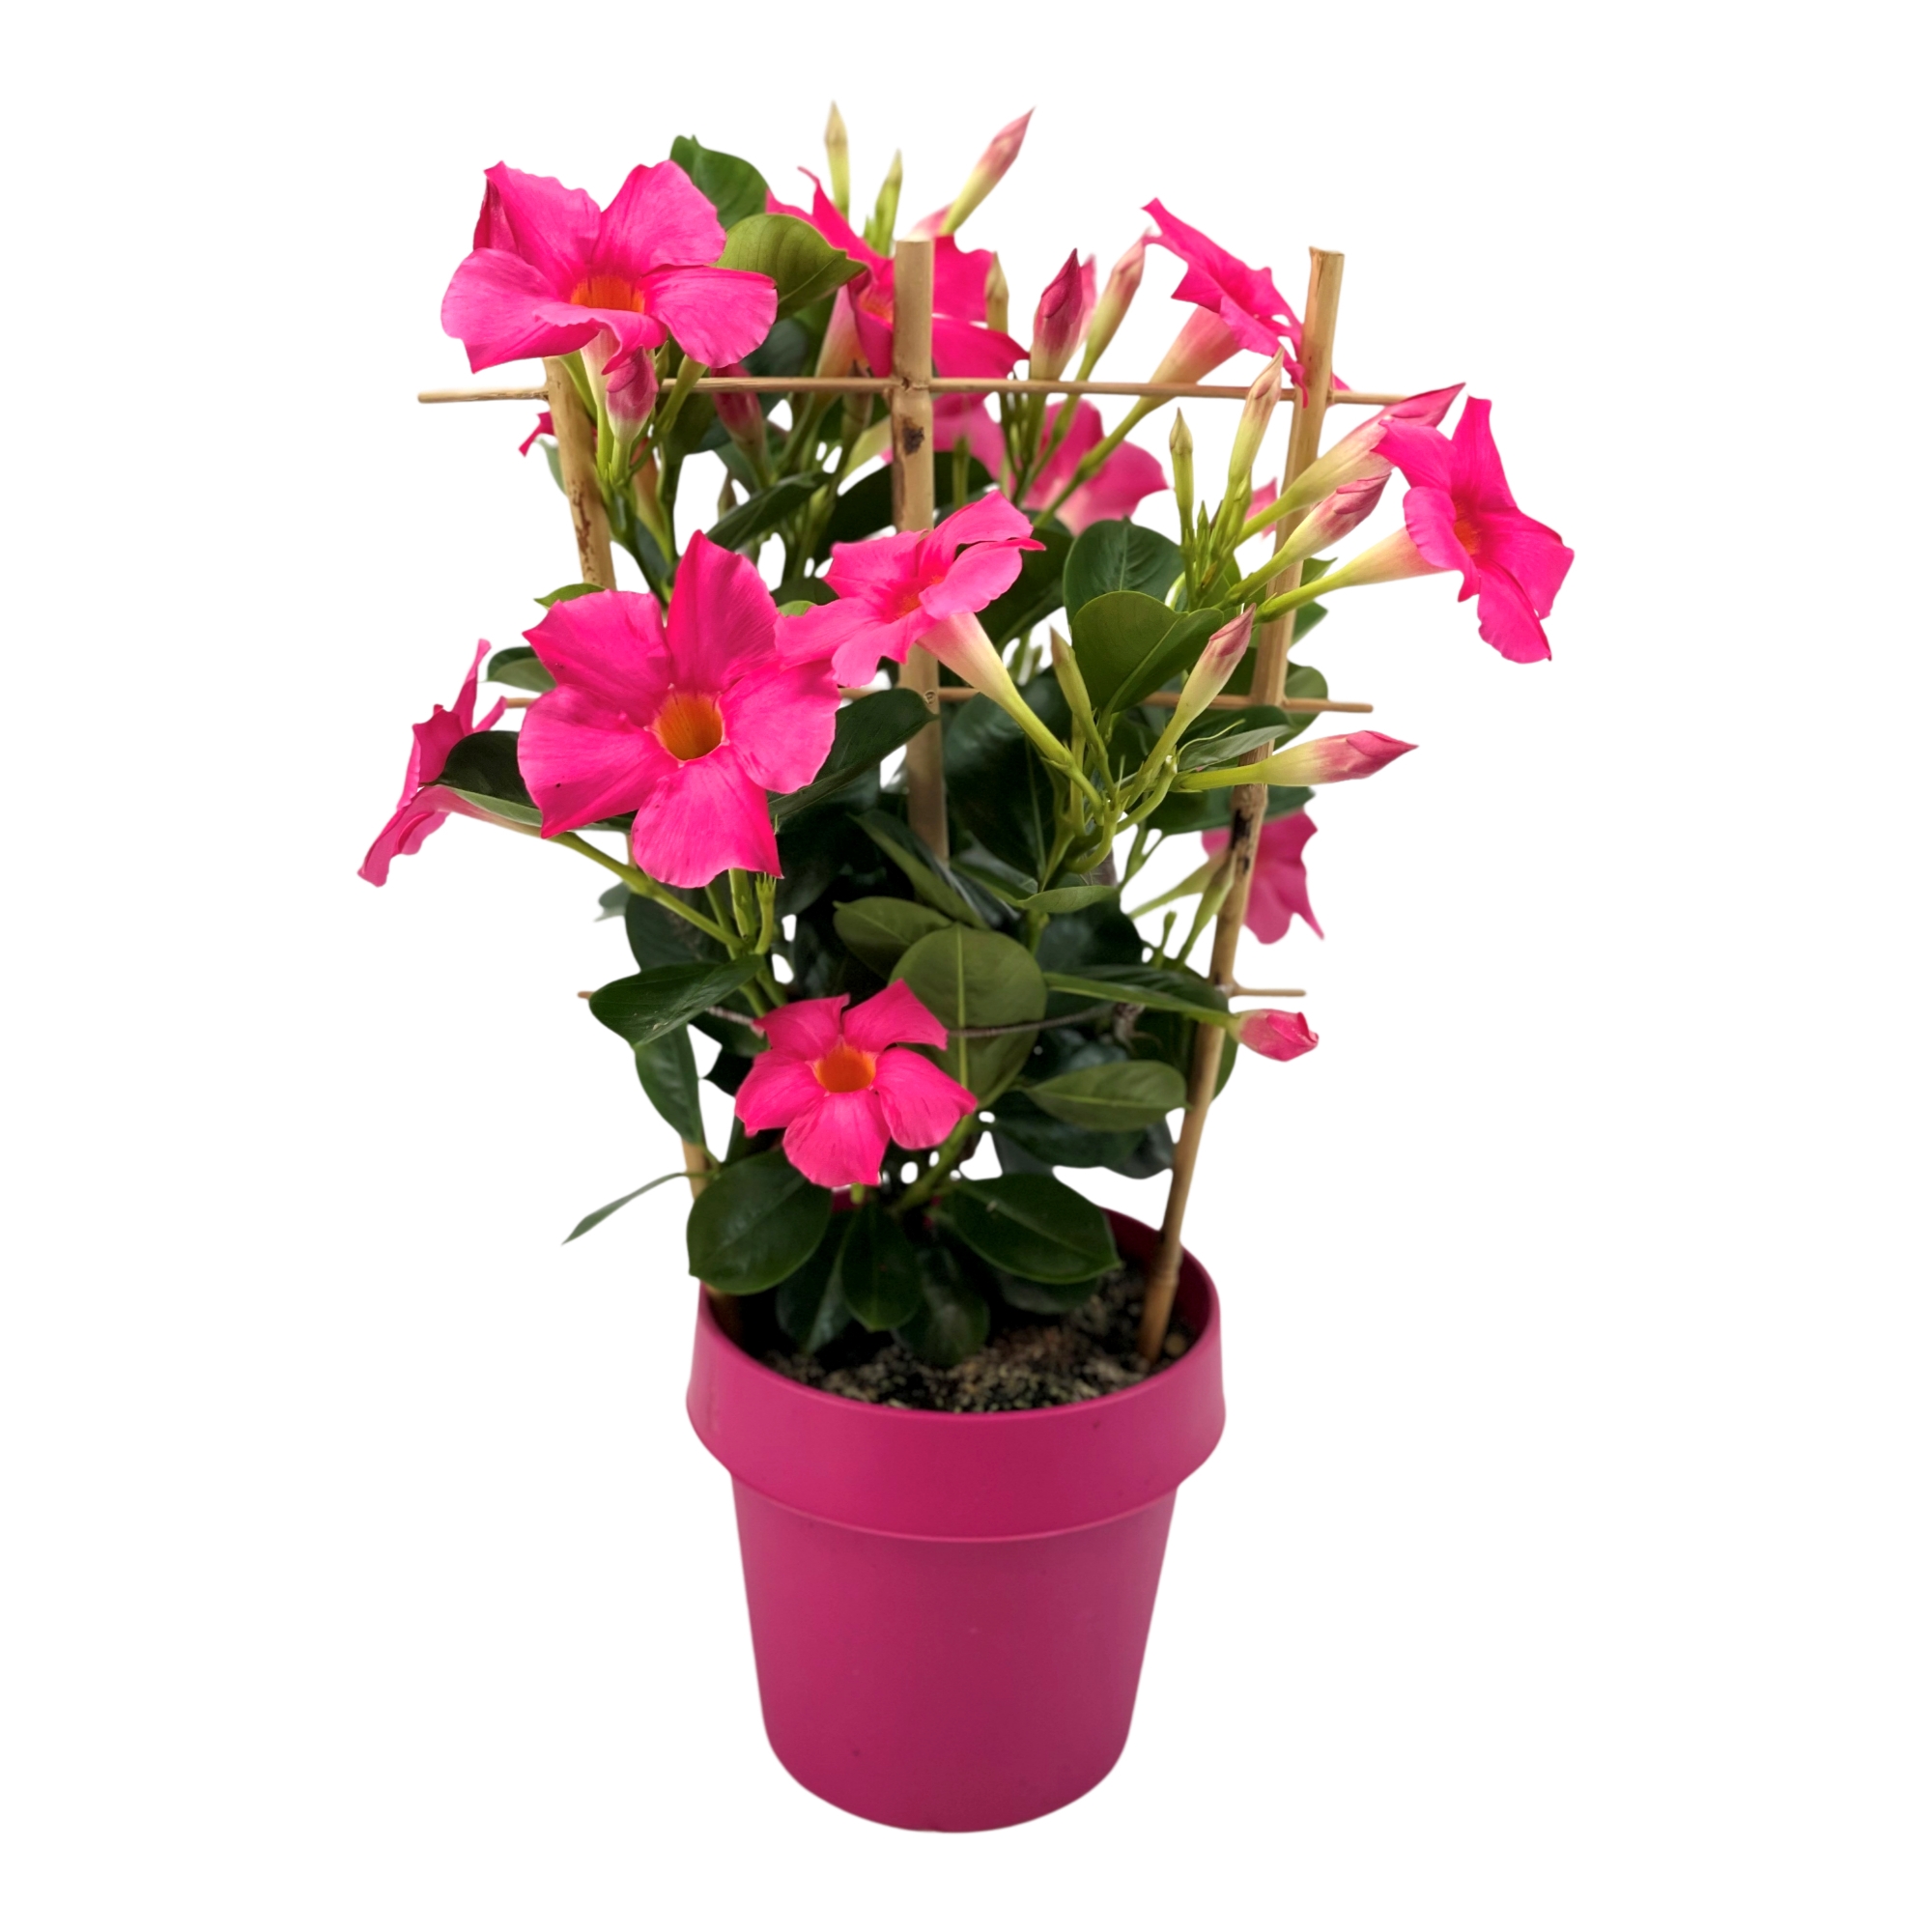 Mandevilla Sundaville Early Pink. Plant with pink flowers on a bamboo rack